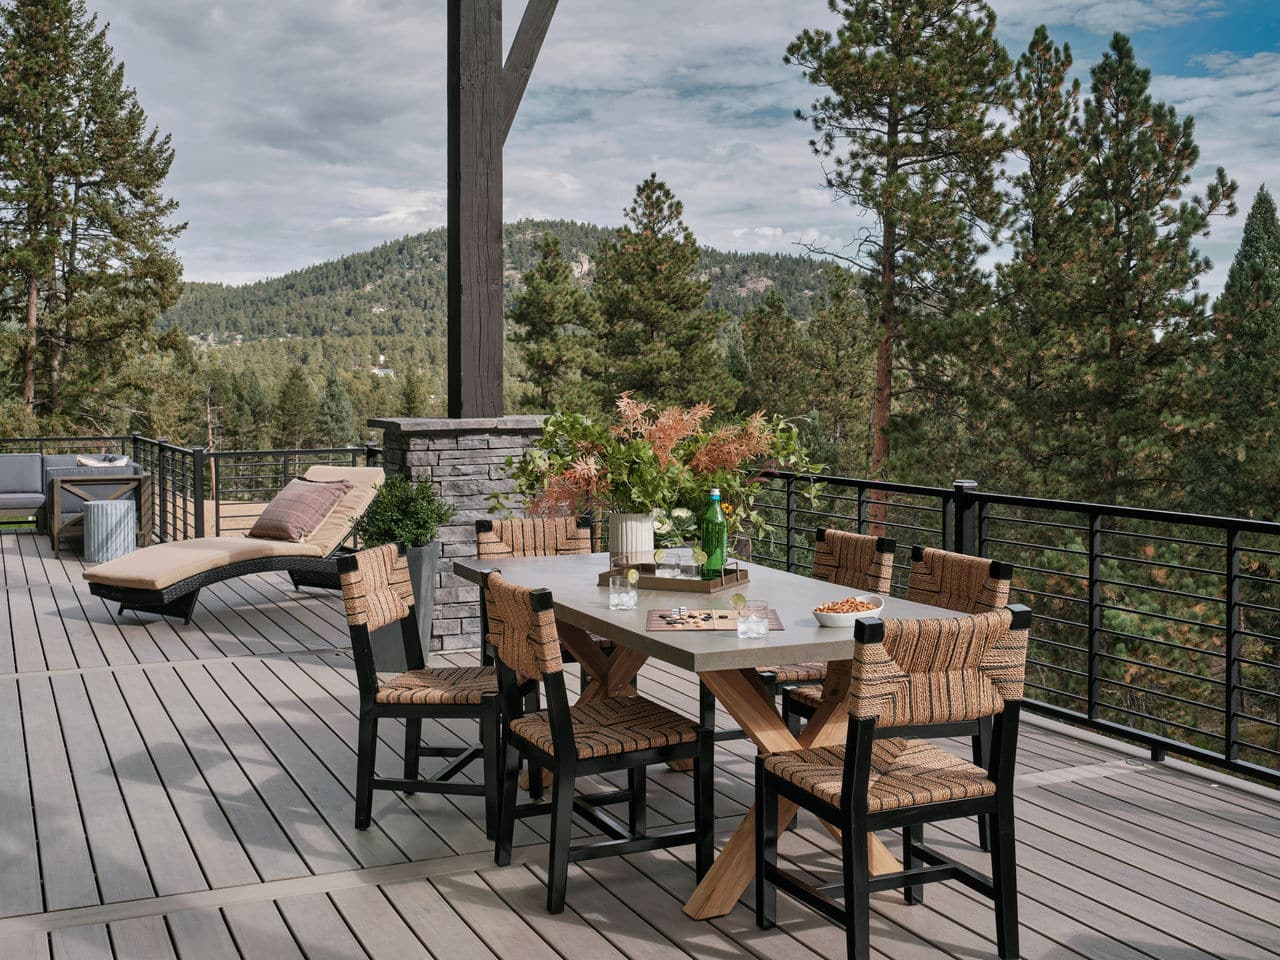 Trex Decking Review: Why O’Keefe Built Recommends It 2